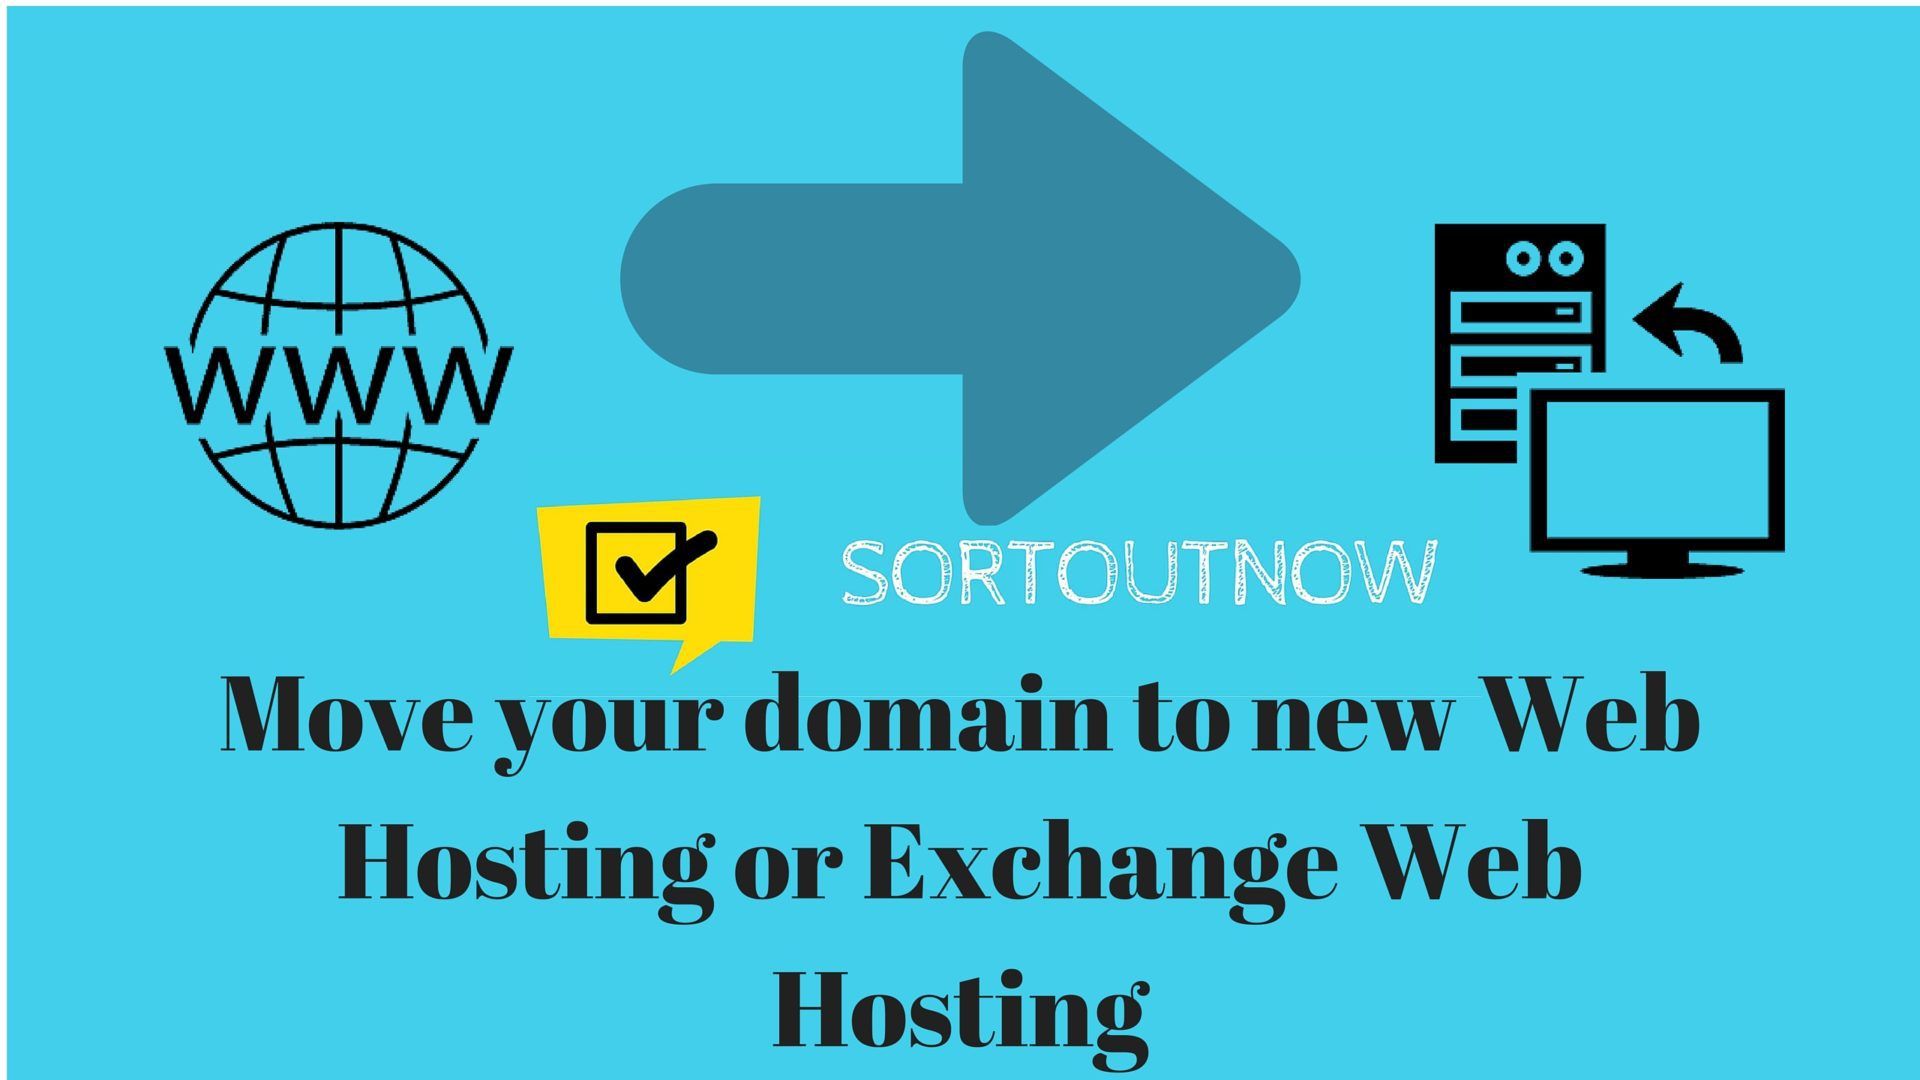 How to move domain to another hosting service